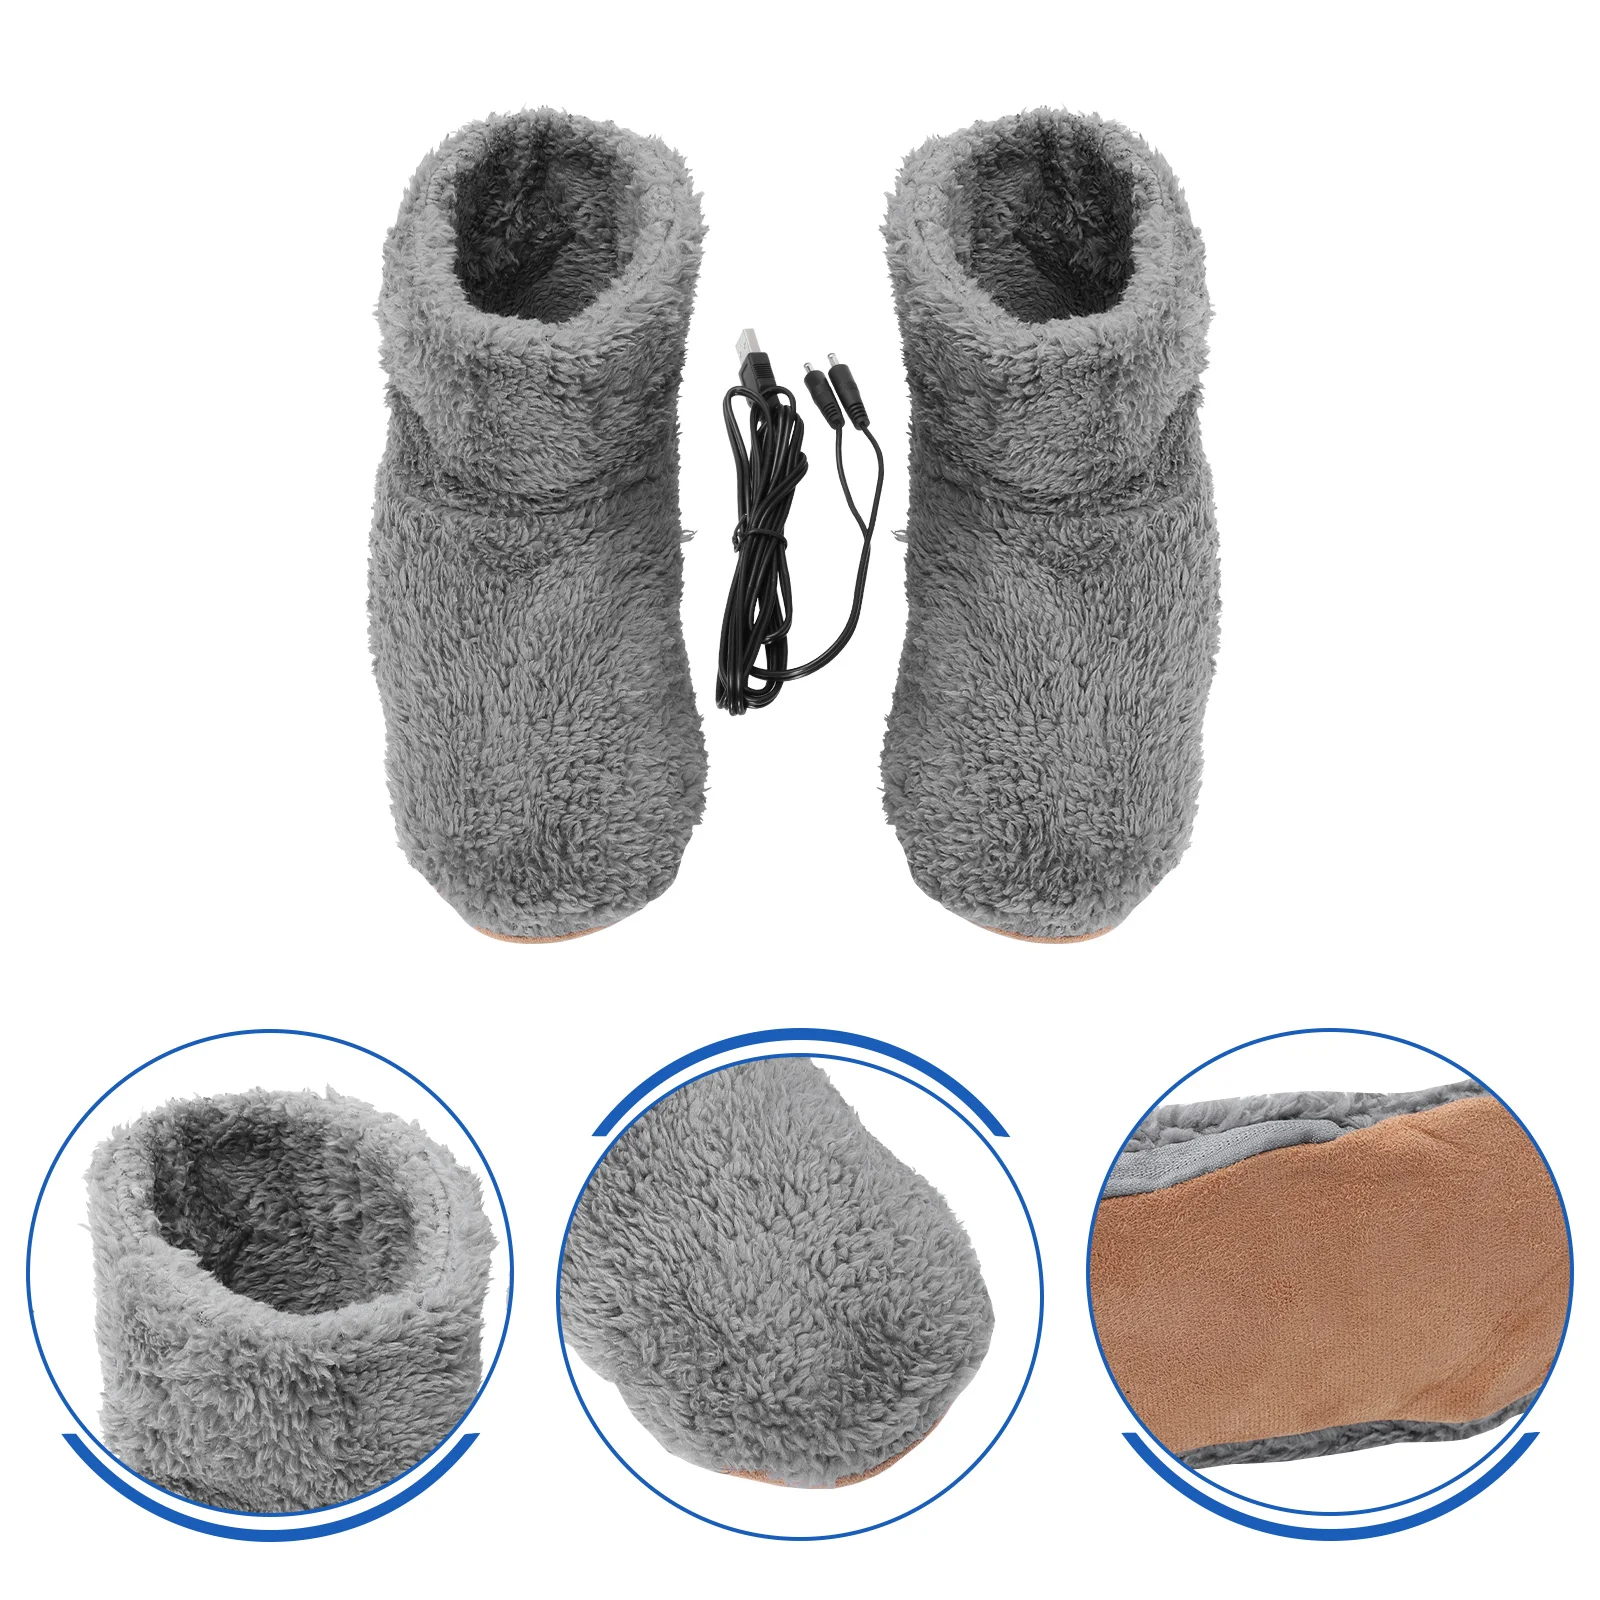 Heated Foot Warmer Slippers Heating Pad Men's Winter Socks Cozy Electric Blanket Shoes Rechargeable Boots Soft